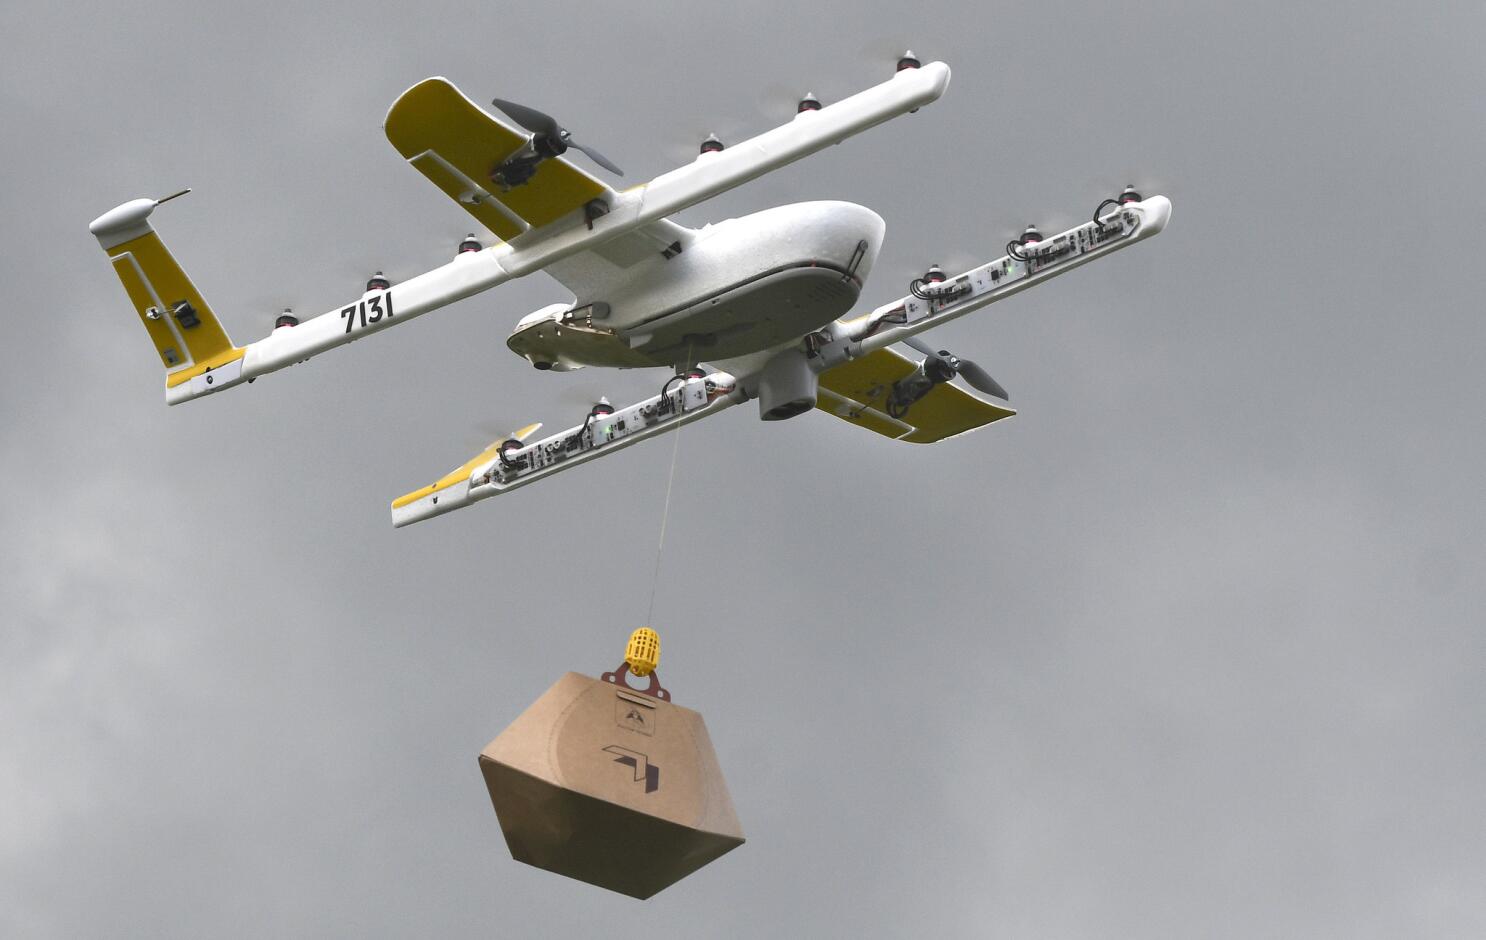 Is Drone Delivery Good for the Environment?, Innovation